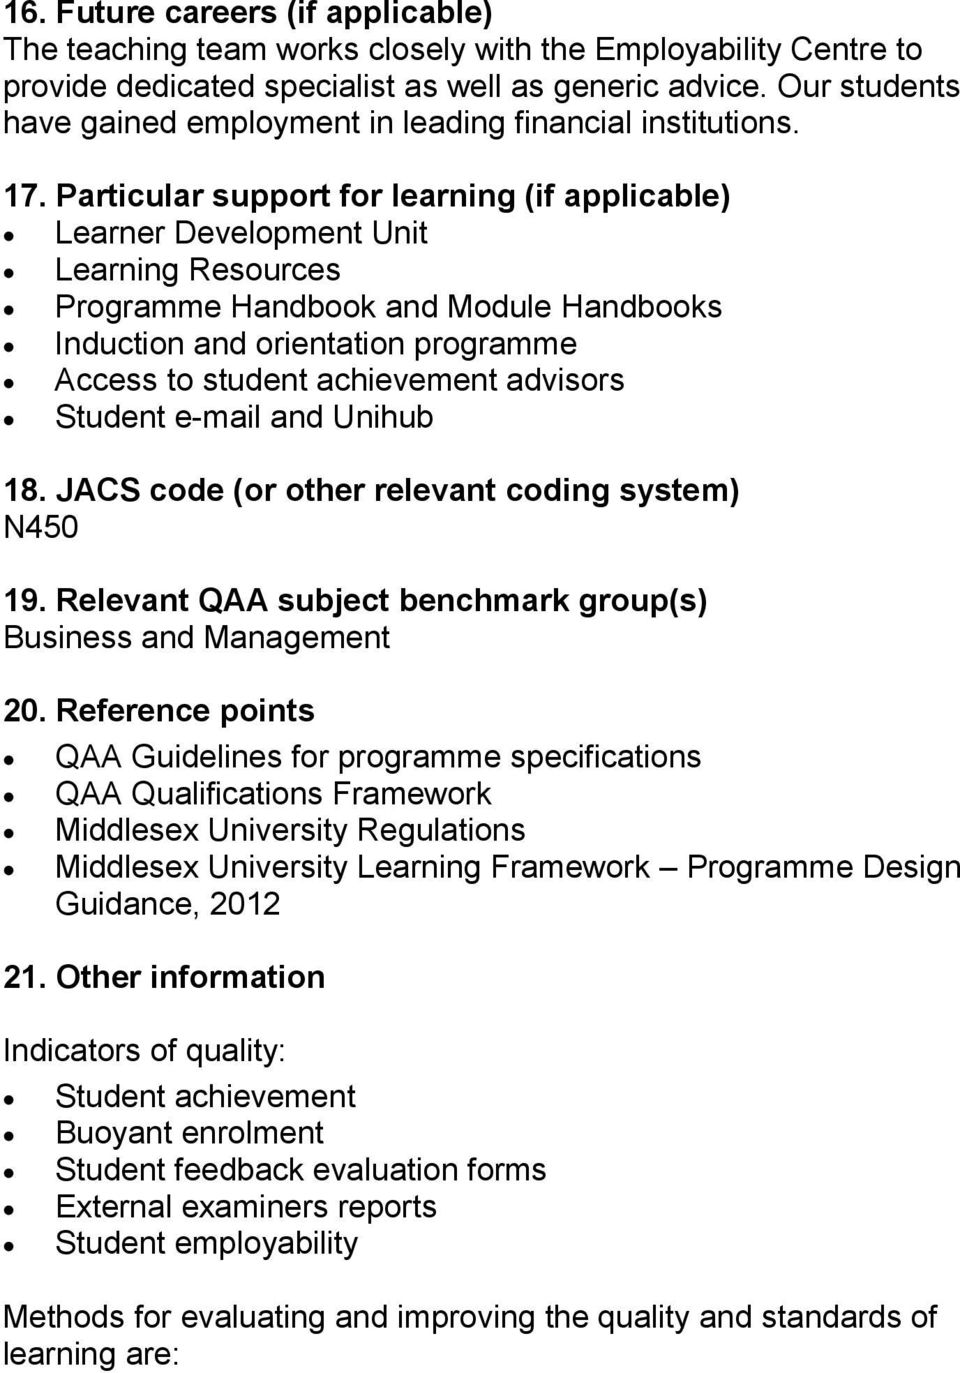 Particular support for learning (if applicable) Learner Development Unit Learning Resources Programme Handbook and Module Handbooks Induction and orientation programme ccess to student achievement